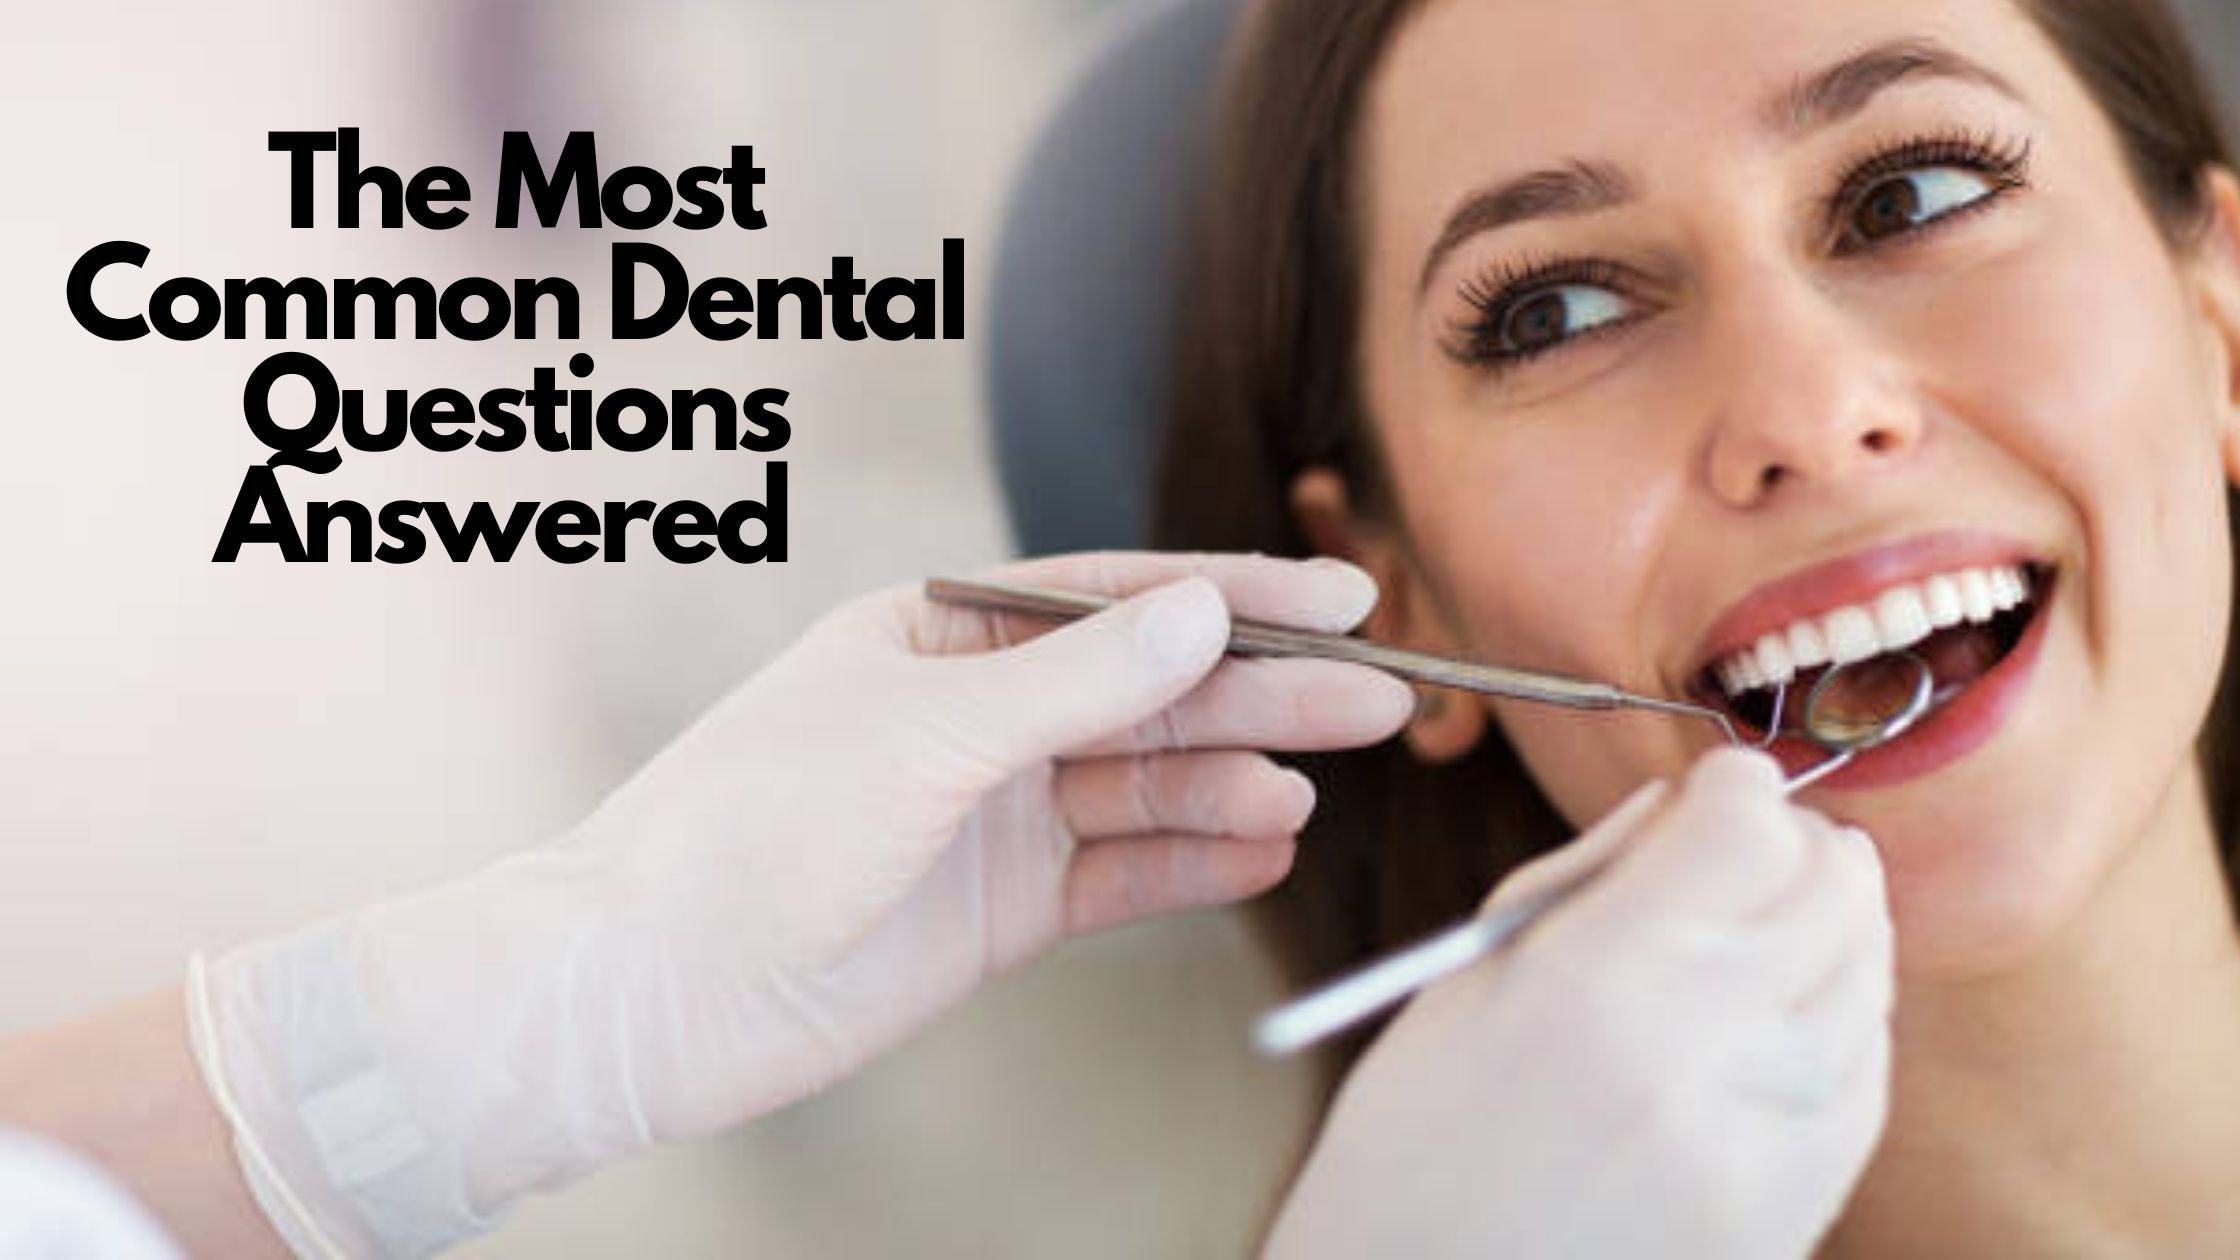 The Most Common Dental Questions Answered